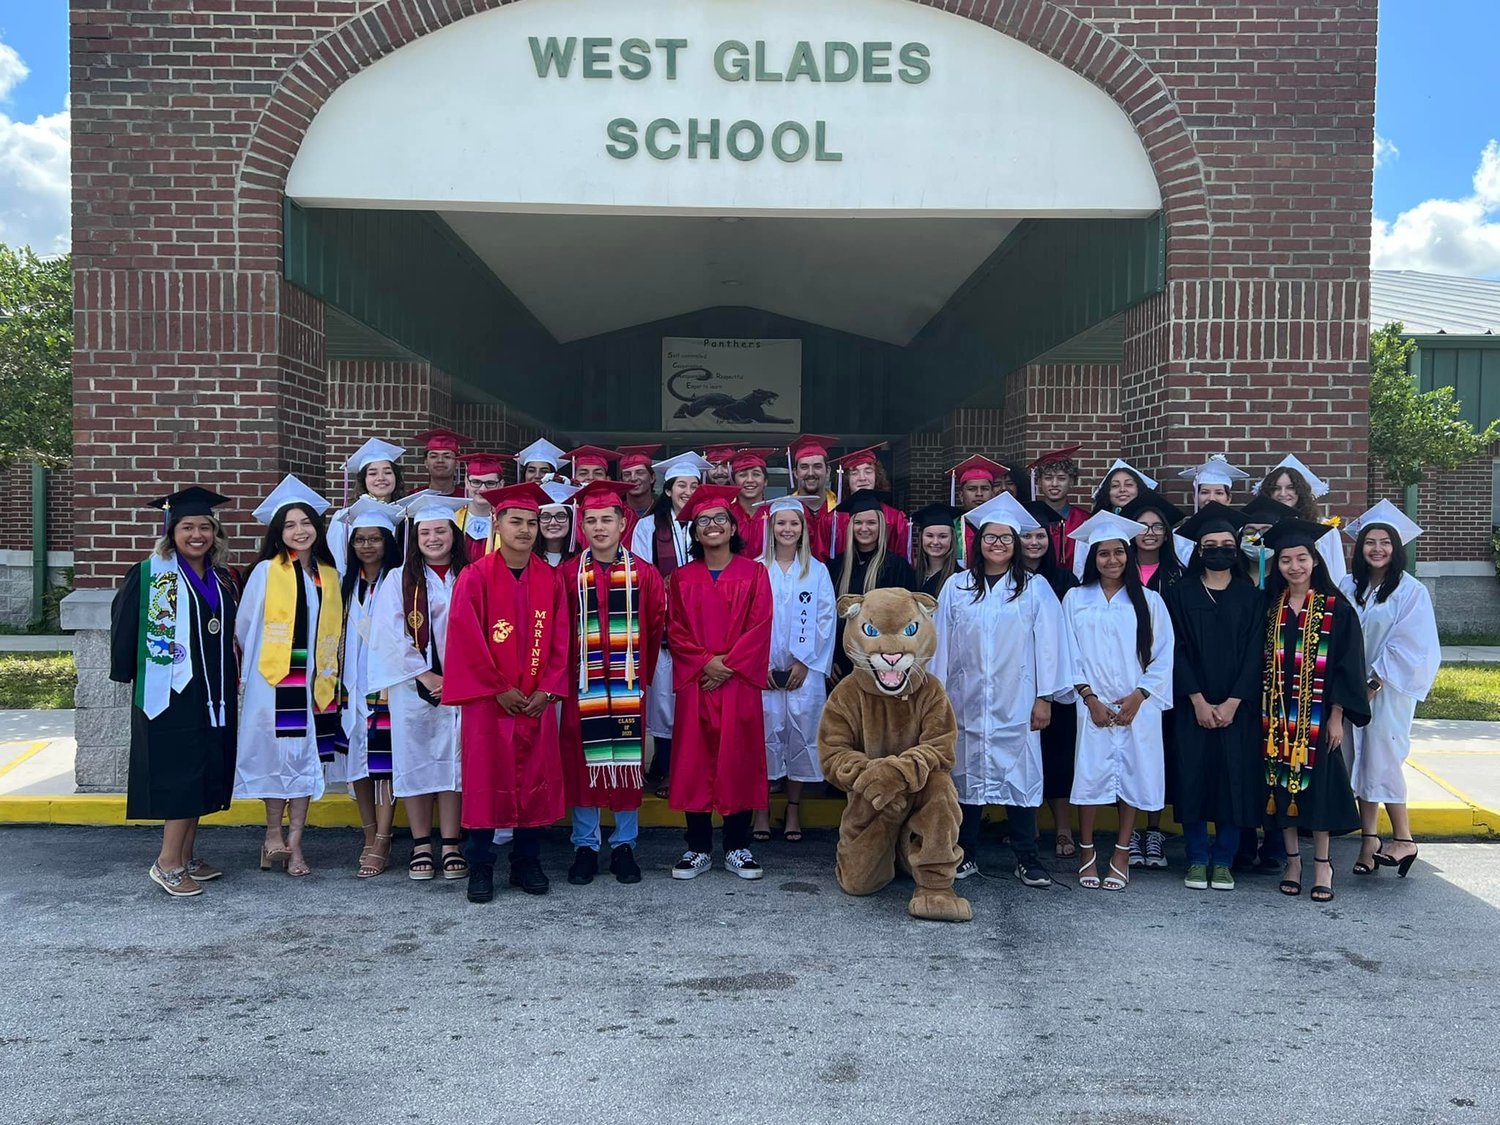 MUSE -- On May 13, West Glades School Alumni Seniors were cheered on by students and staff as they walked the halls one last time before graduating and starting a new chapter in life. [Photo courtesy West Glades School]